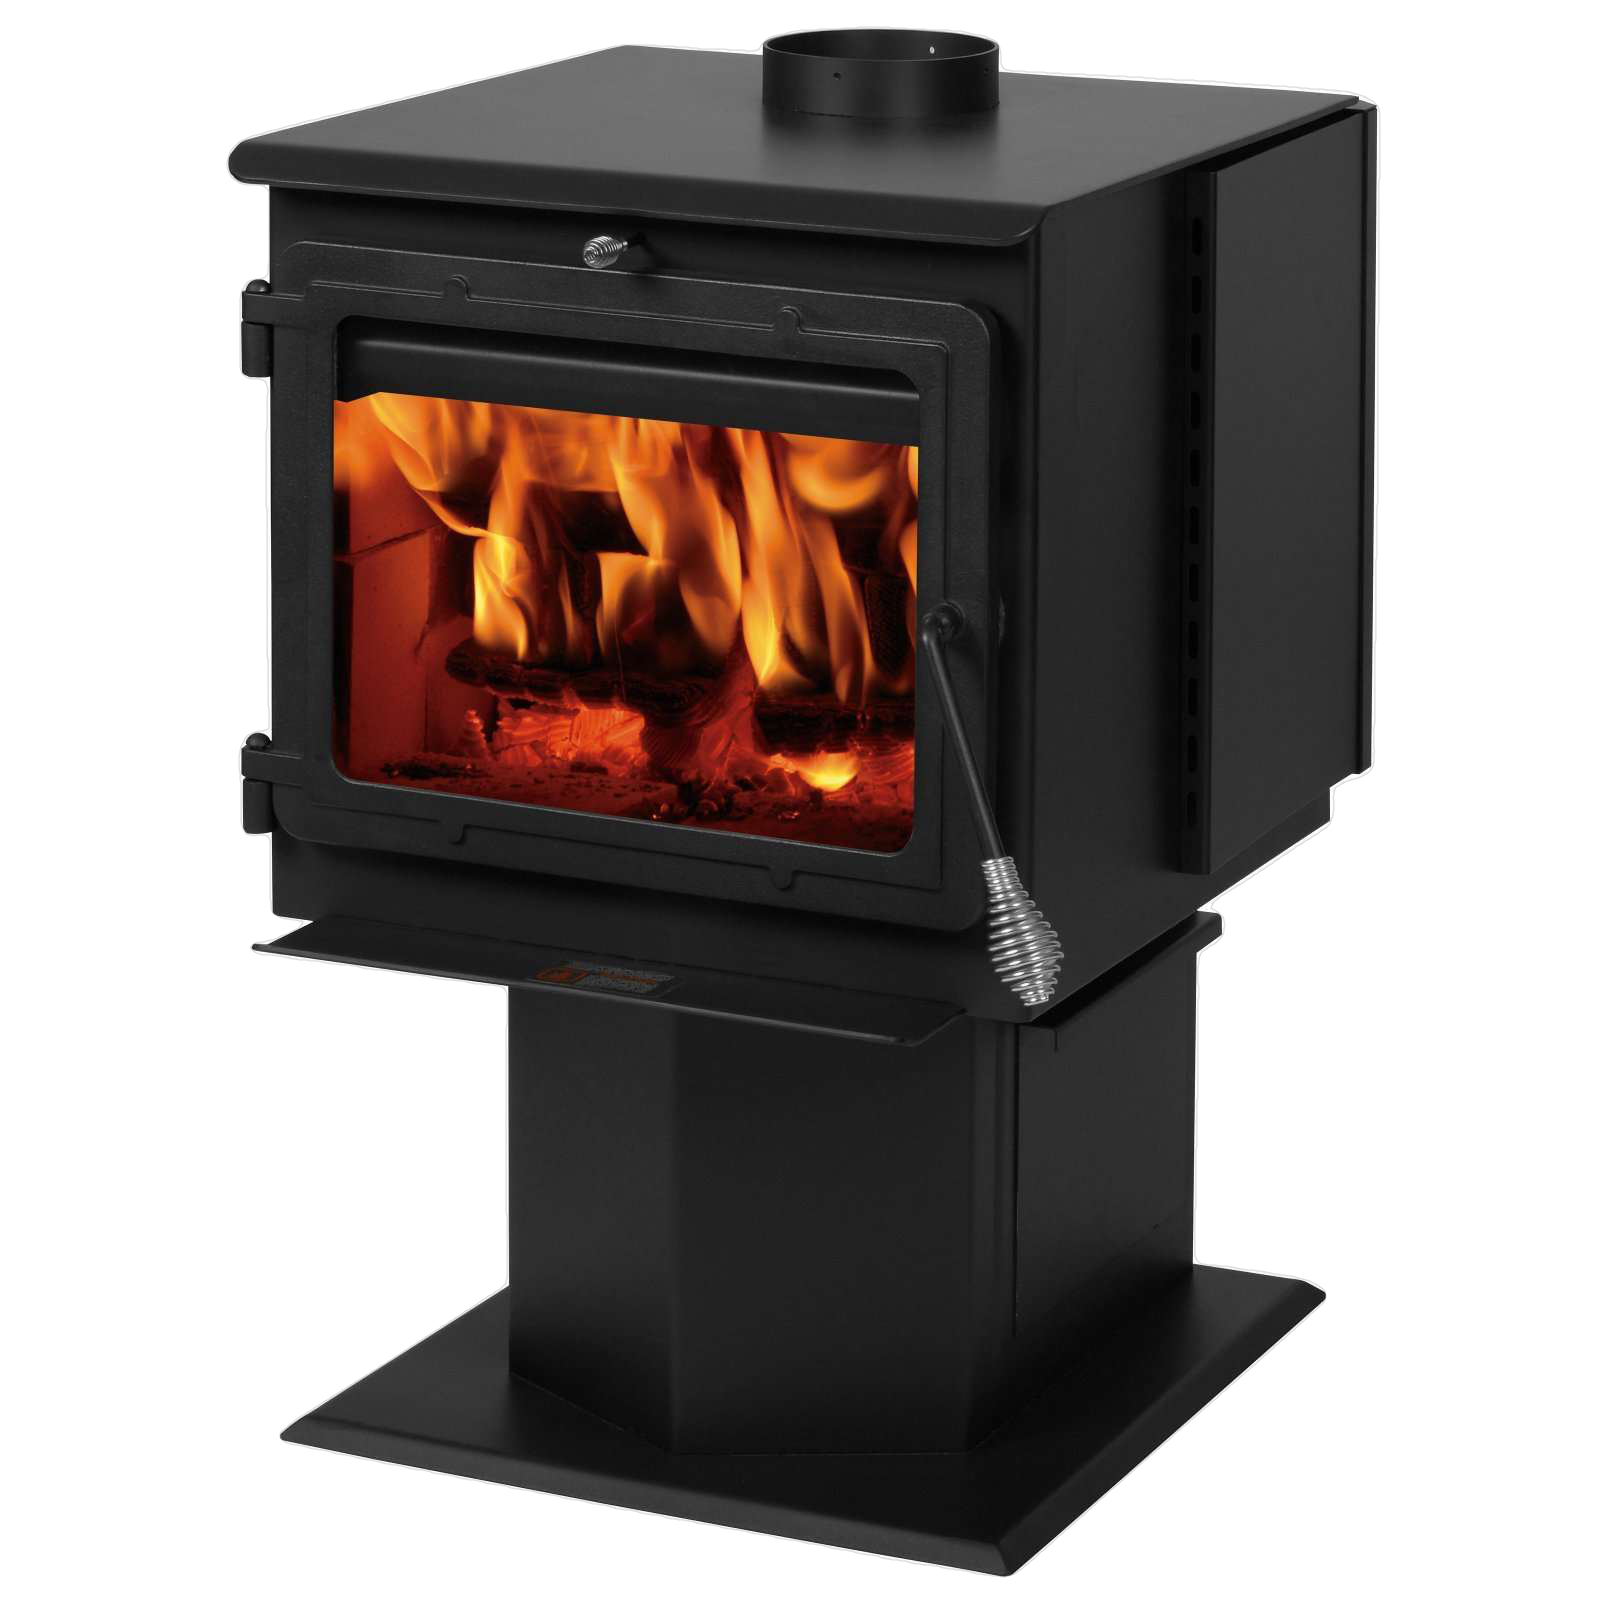 England's Stove Works Summers Heat 50-SHSSW01 Smartstove 2,200 sq. ft. Wood Stove New